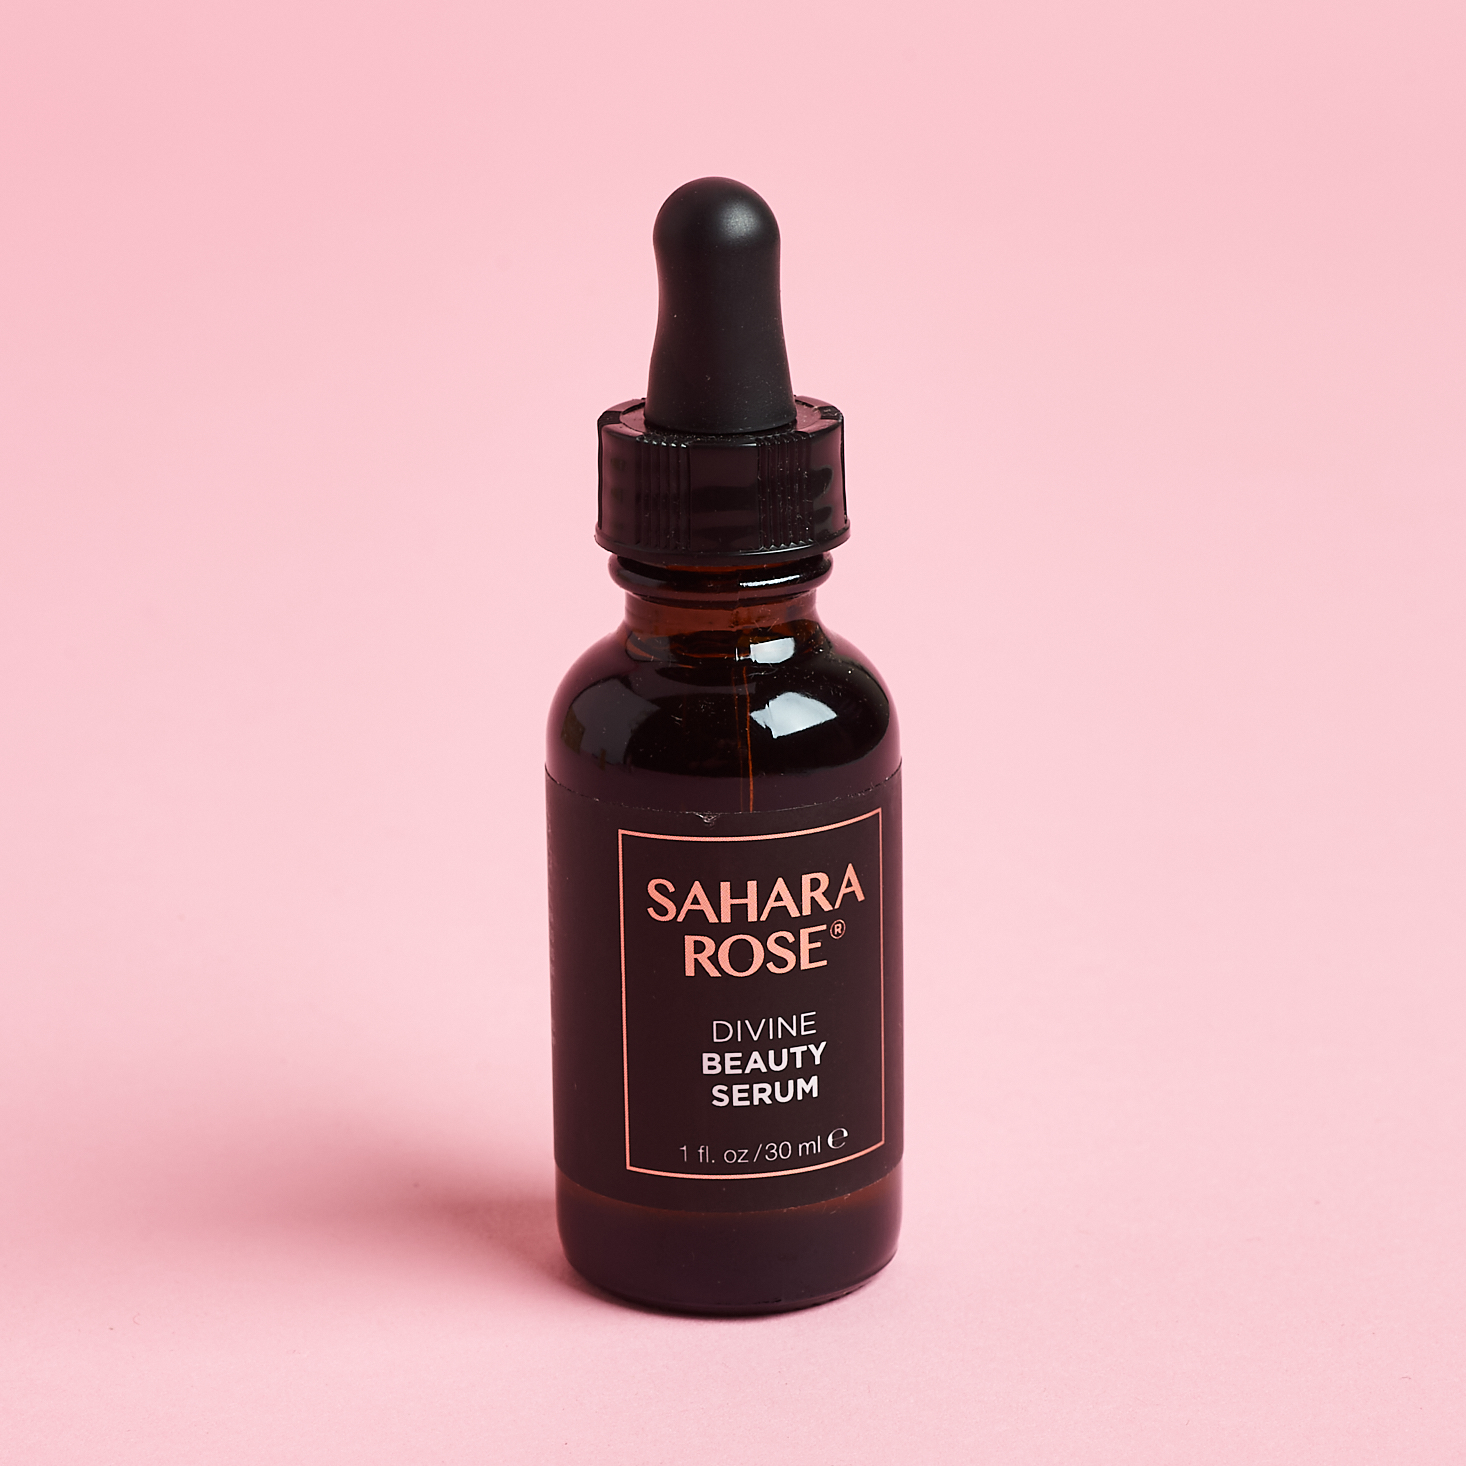 The front of the bottle for Sahara Rose Divine Beauty Serum from the Nourish Beauty Box June 2021.